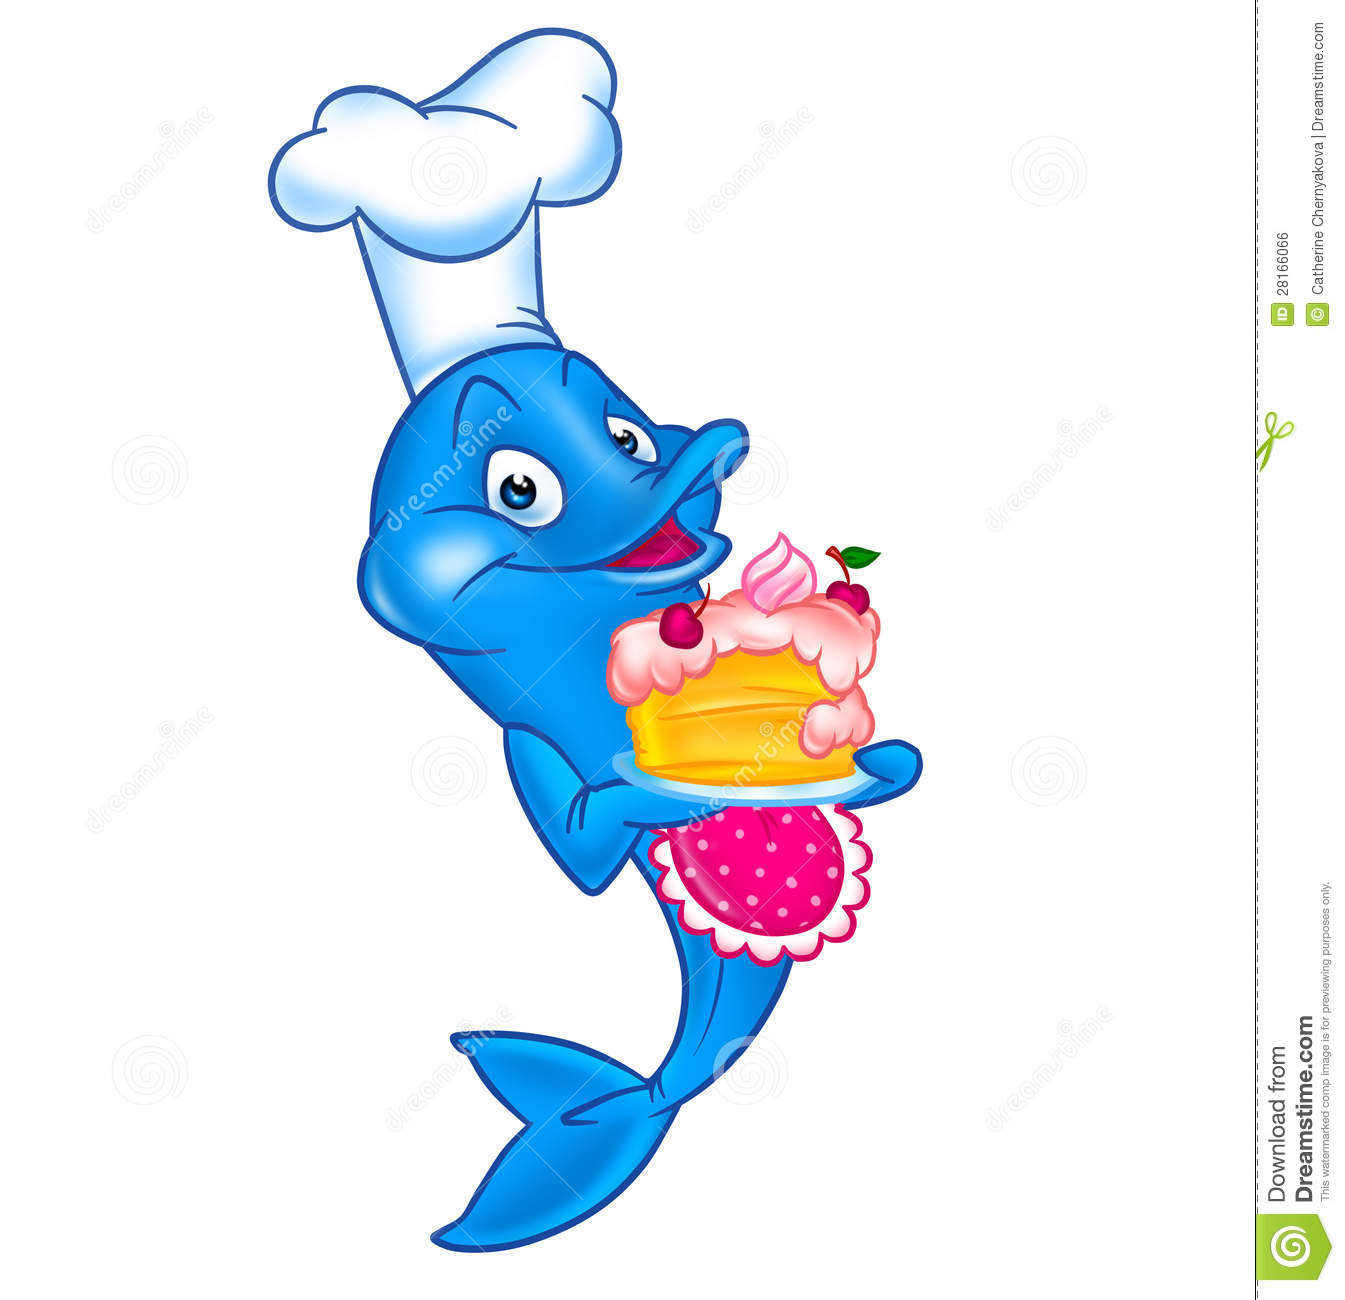 Fish Cheerful Chef Cook And Cake Royalty Free Stock Image   Image